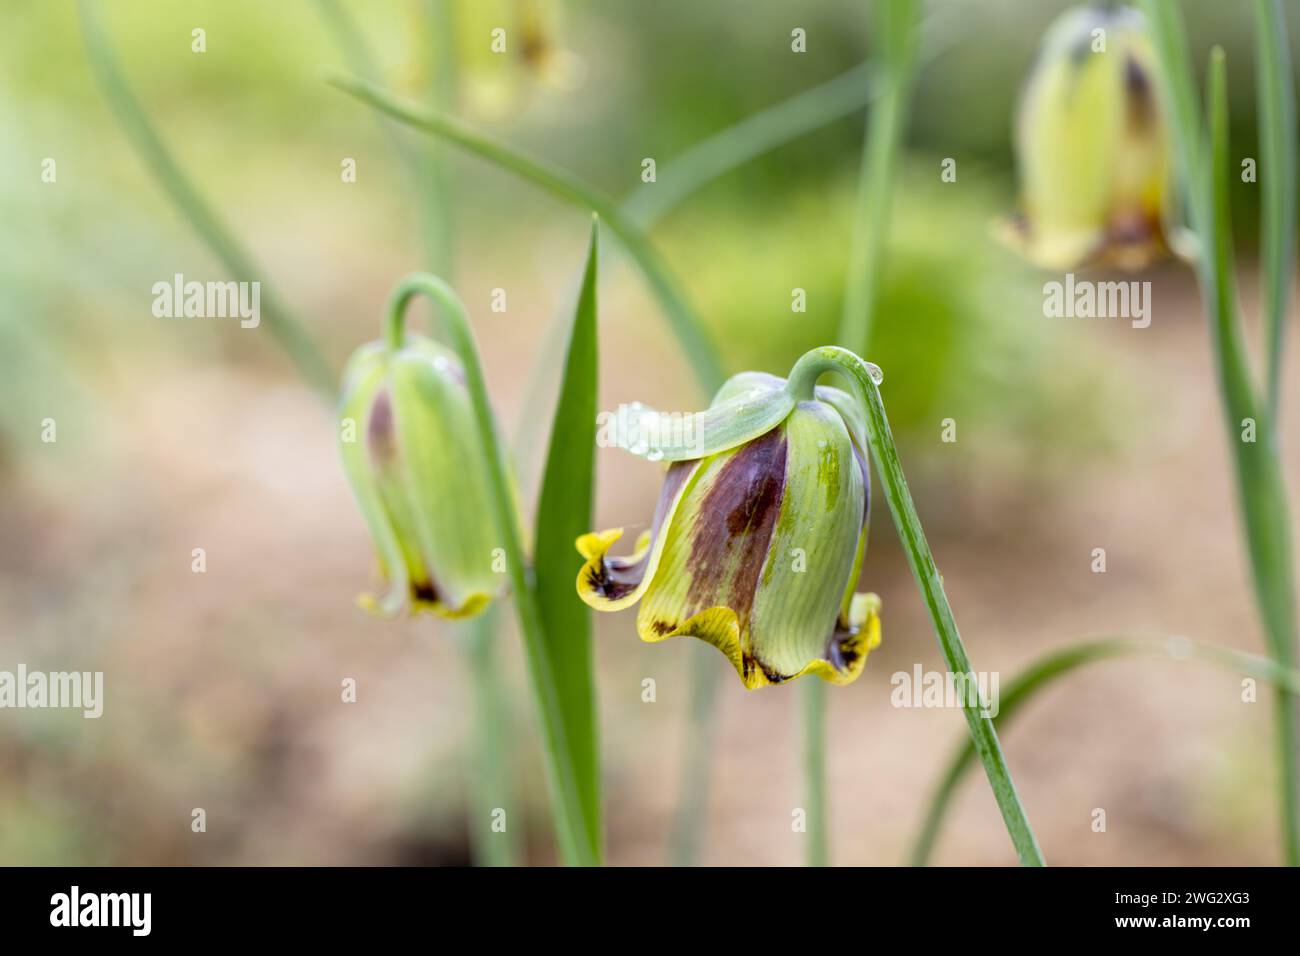 Fritillaria acmopetala, the pointed-petal fritillary bloom in spring in the garden on a sunny day Stock Photo